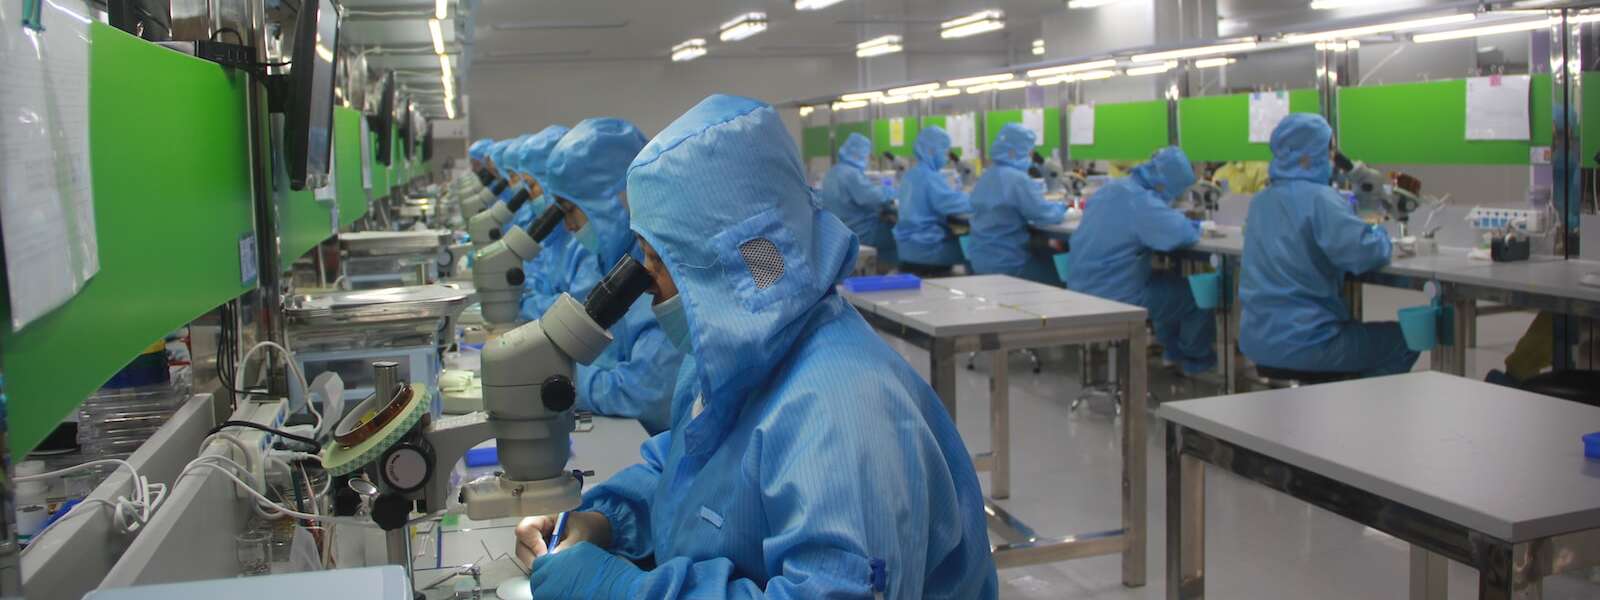 people in blue coveralls and masks work in a factory